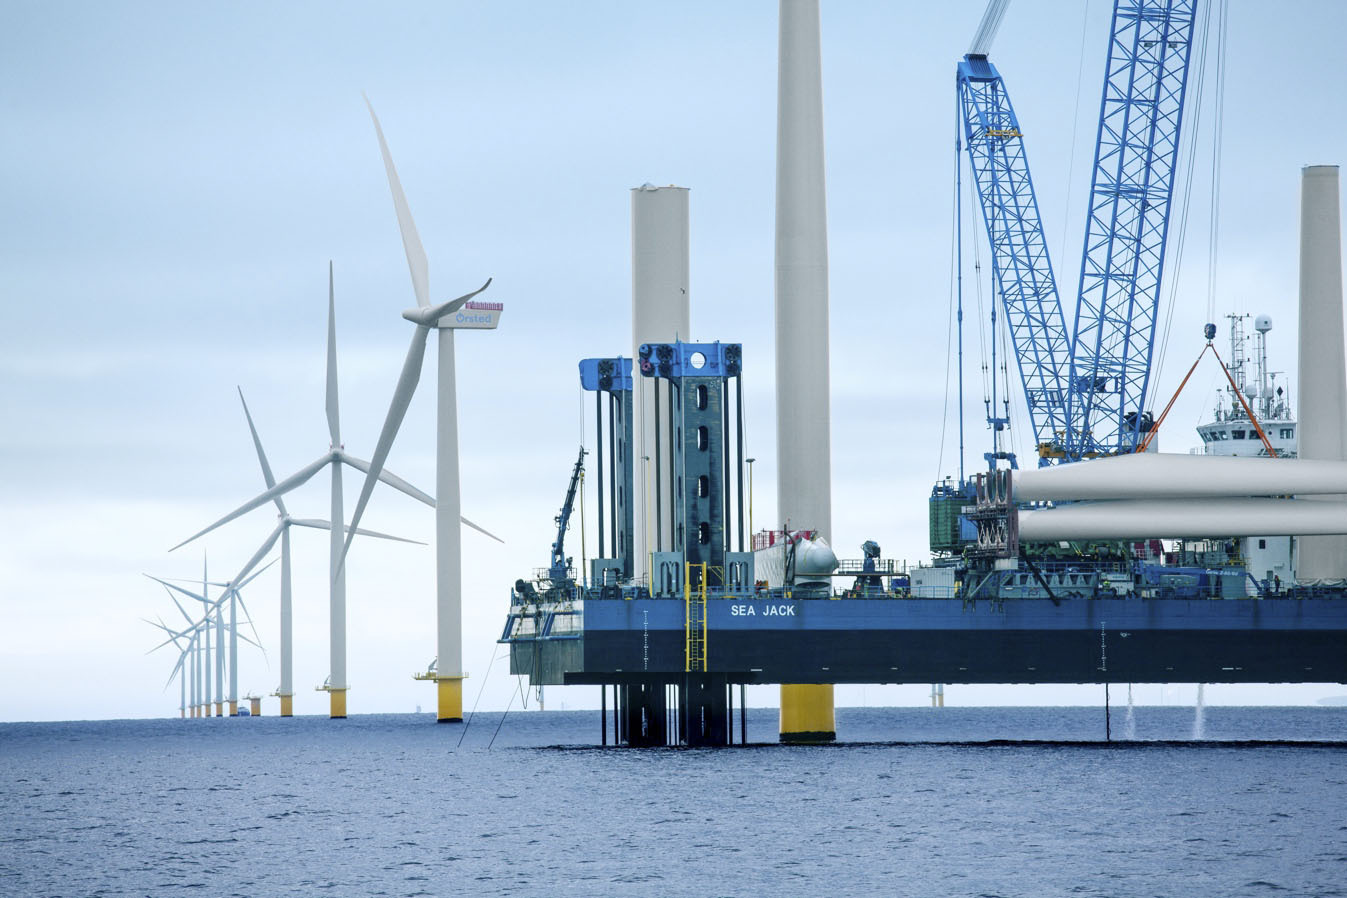 Wind farm developer Orsted announced that is has reached an agreement with construction unions to use all union workers on its offshore wind farm projects in U.S. waters.